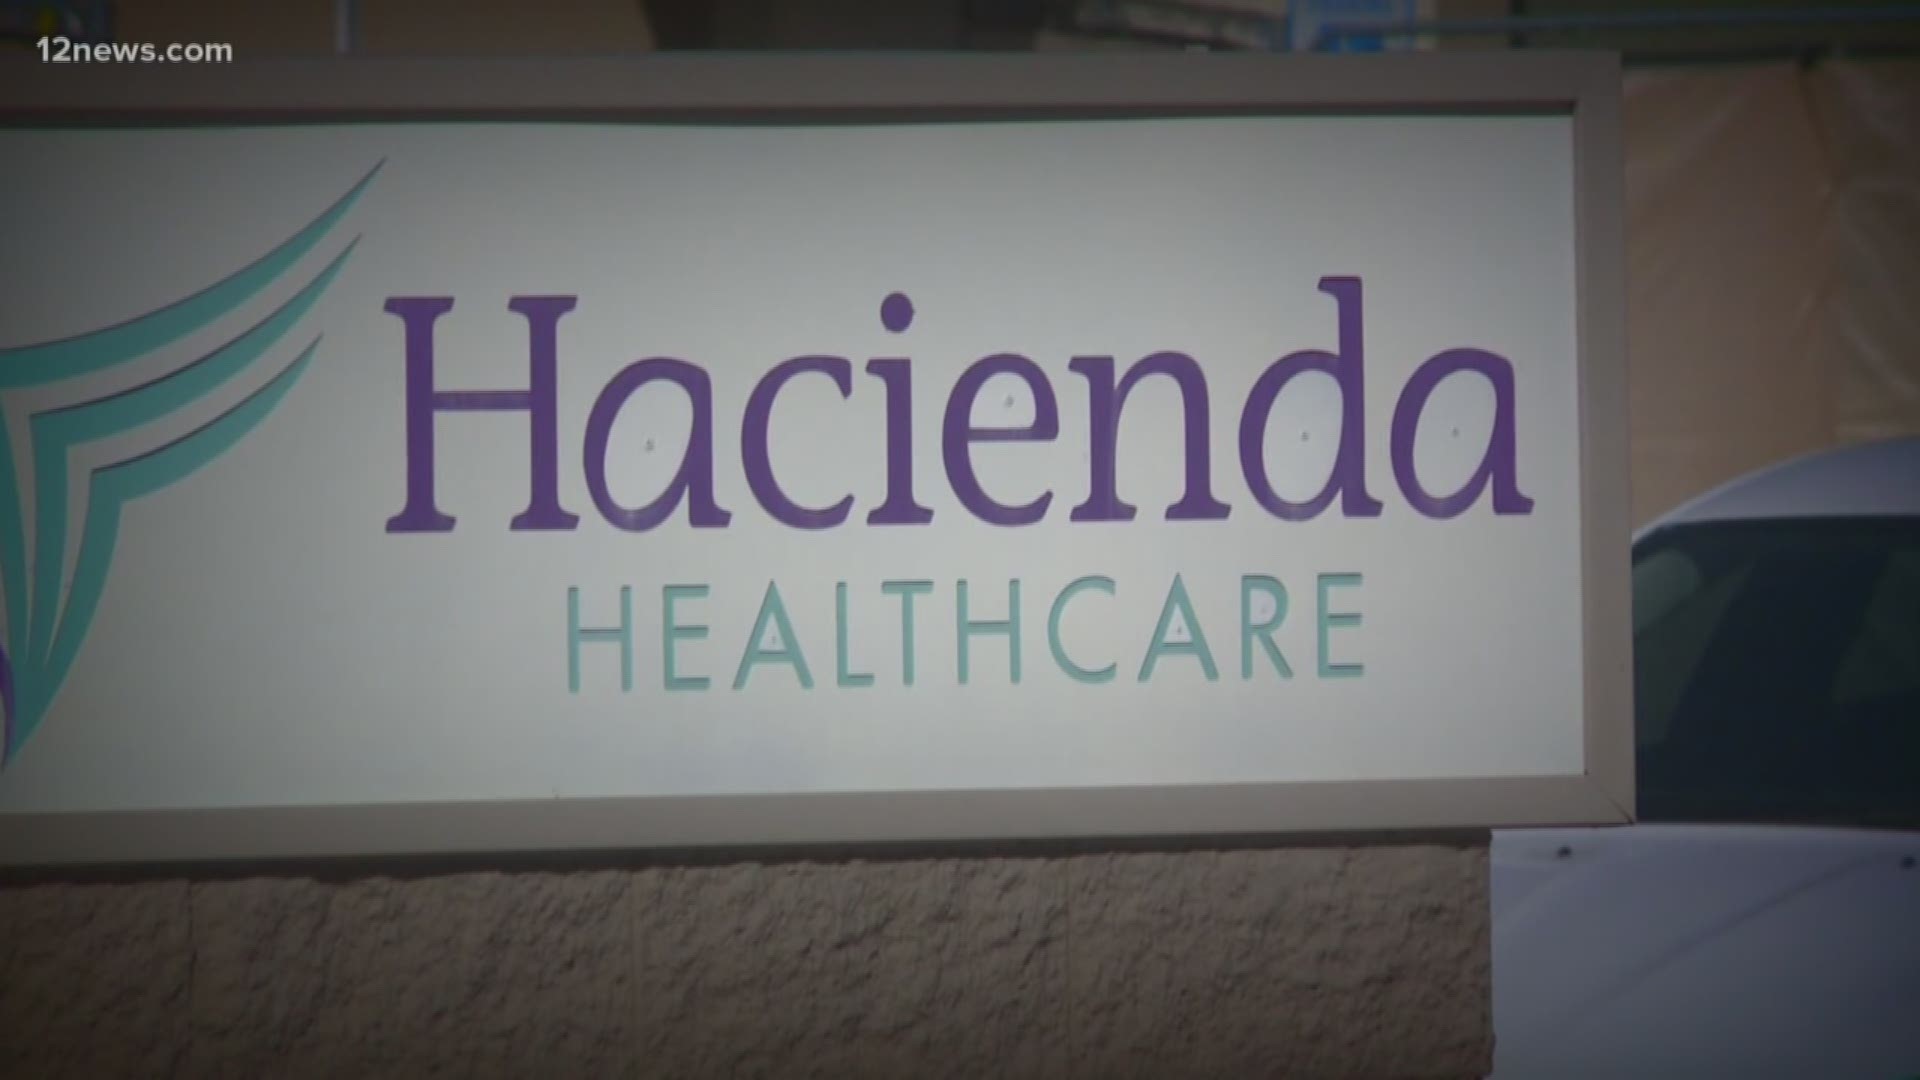 A 40 year board member of Hacienda Healthcare is stepping down. The move comes a few weeks after Governor Ducey blasted the facility, where an incapacitated woman gave birth to a child in December, for trying to shut down.